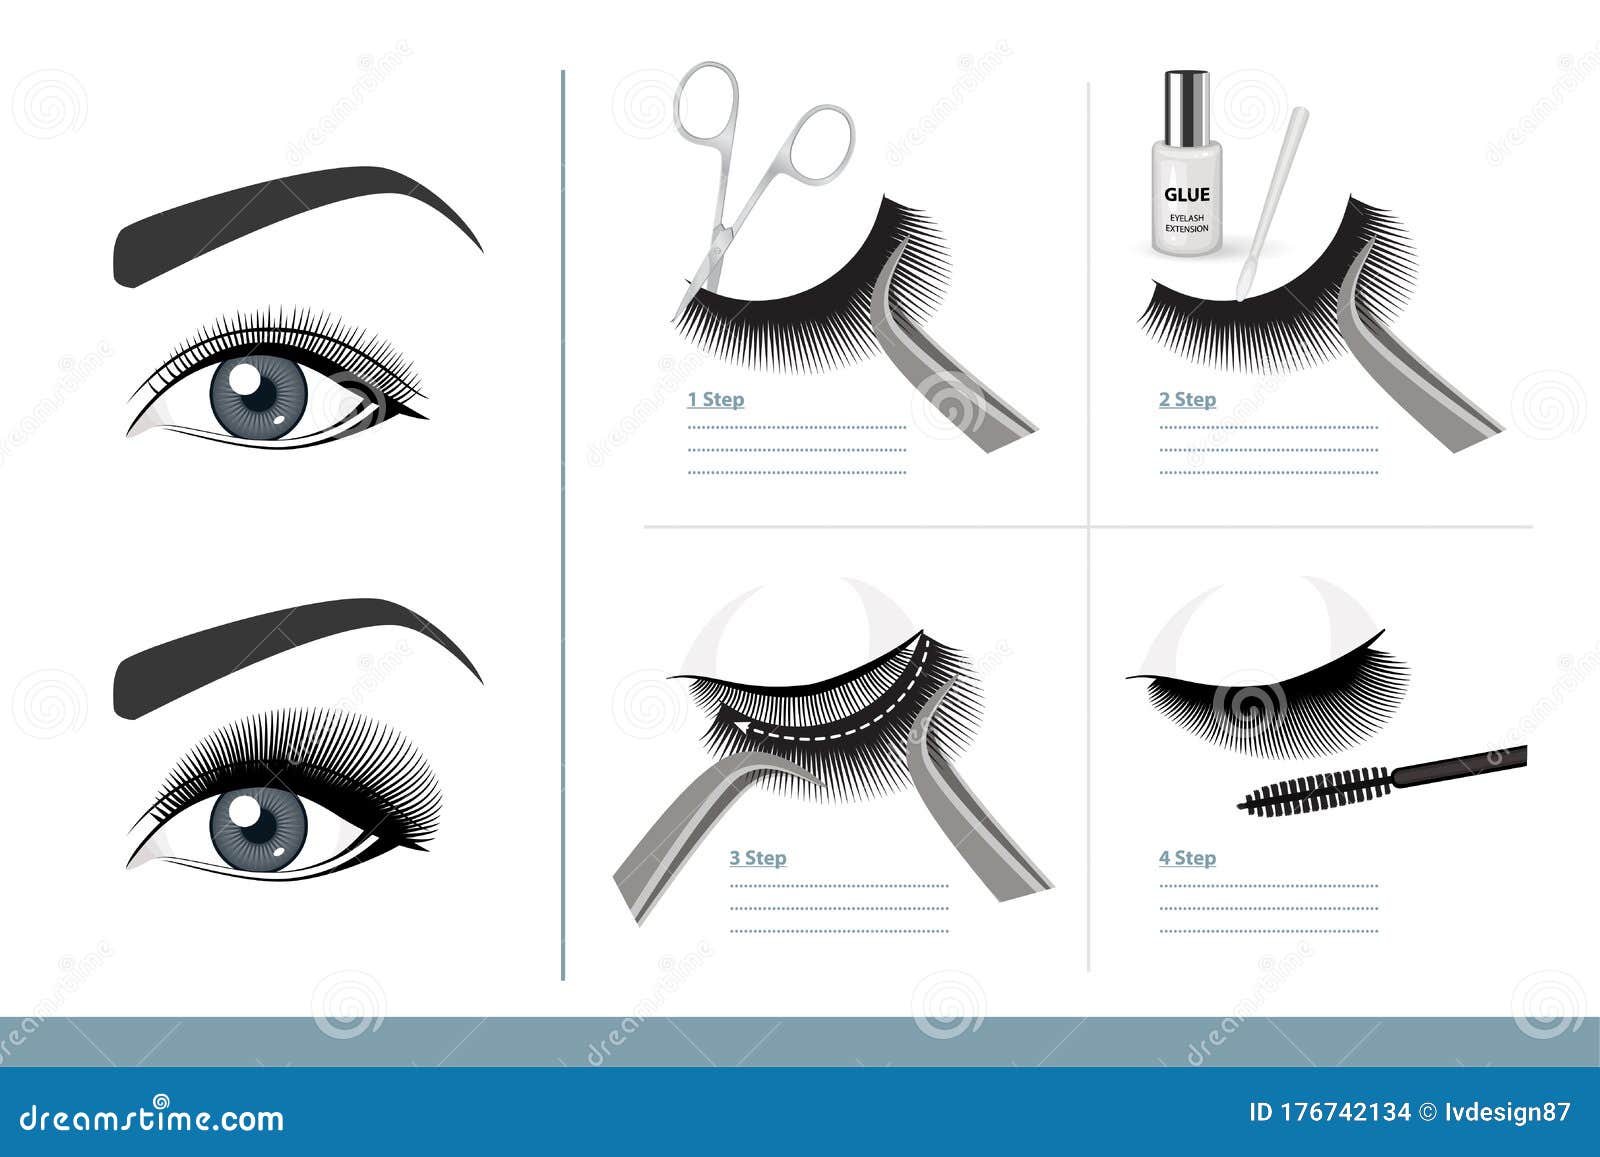 how to apply false eyelashes step by step properly. full tutorial on application. guide. infographic 